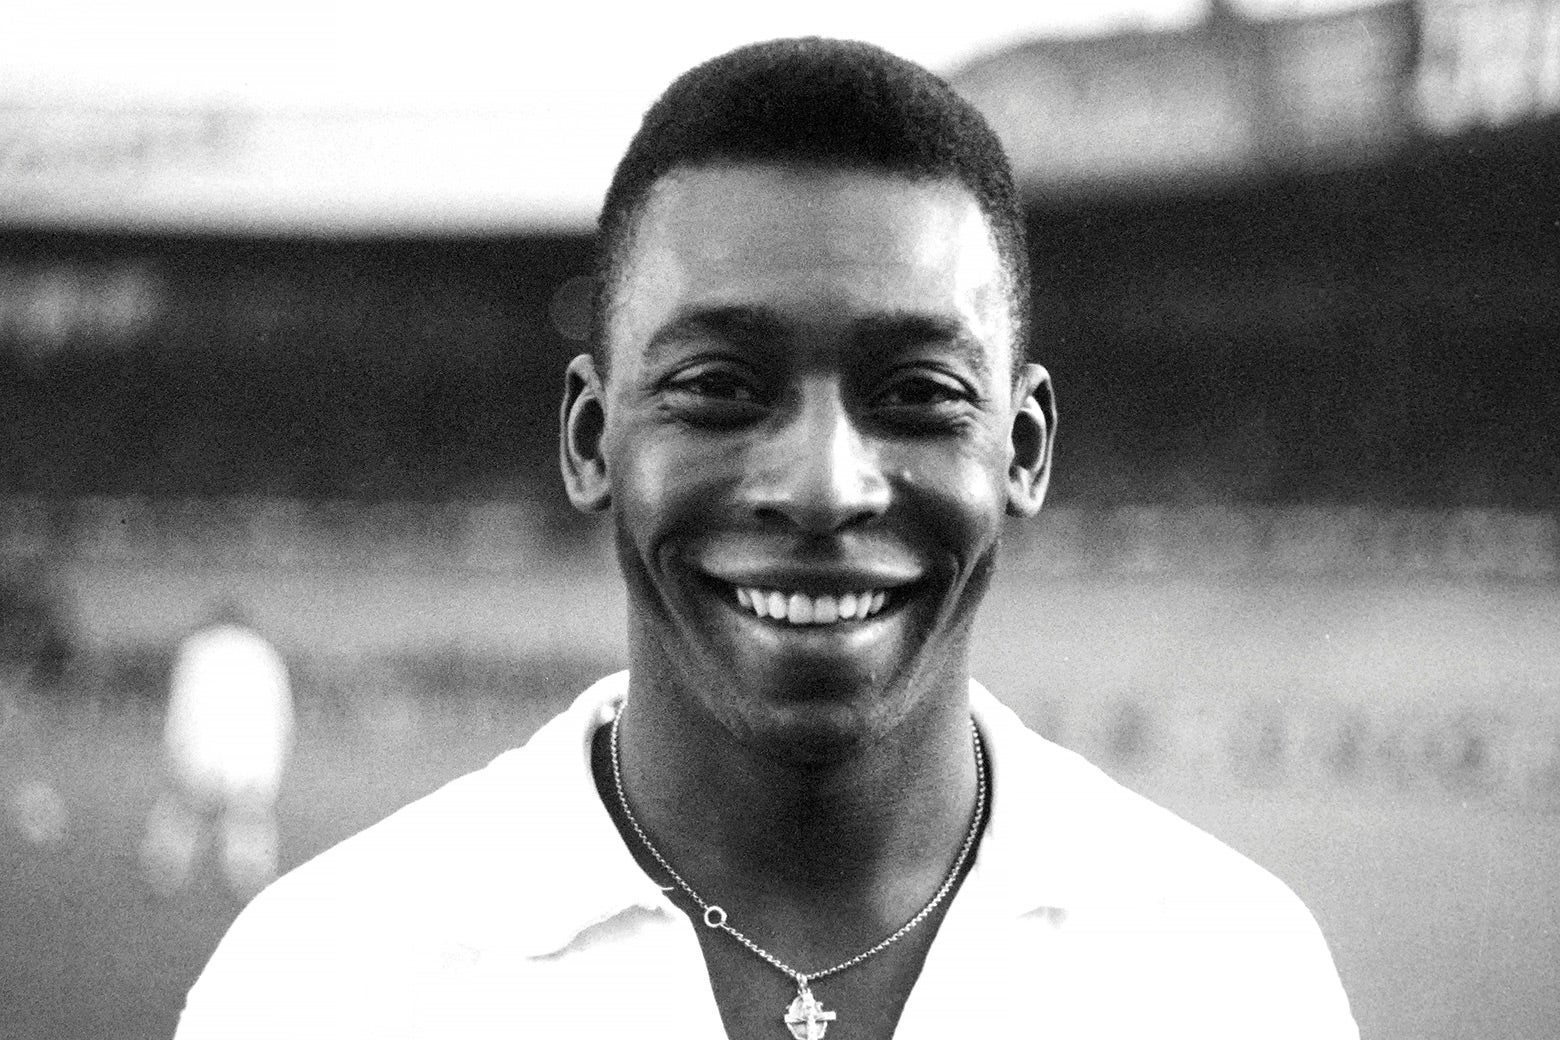 Pelé on the pitch smiling at the camera in a jersey and a necklace.